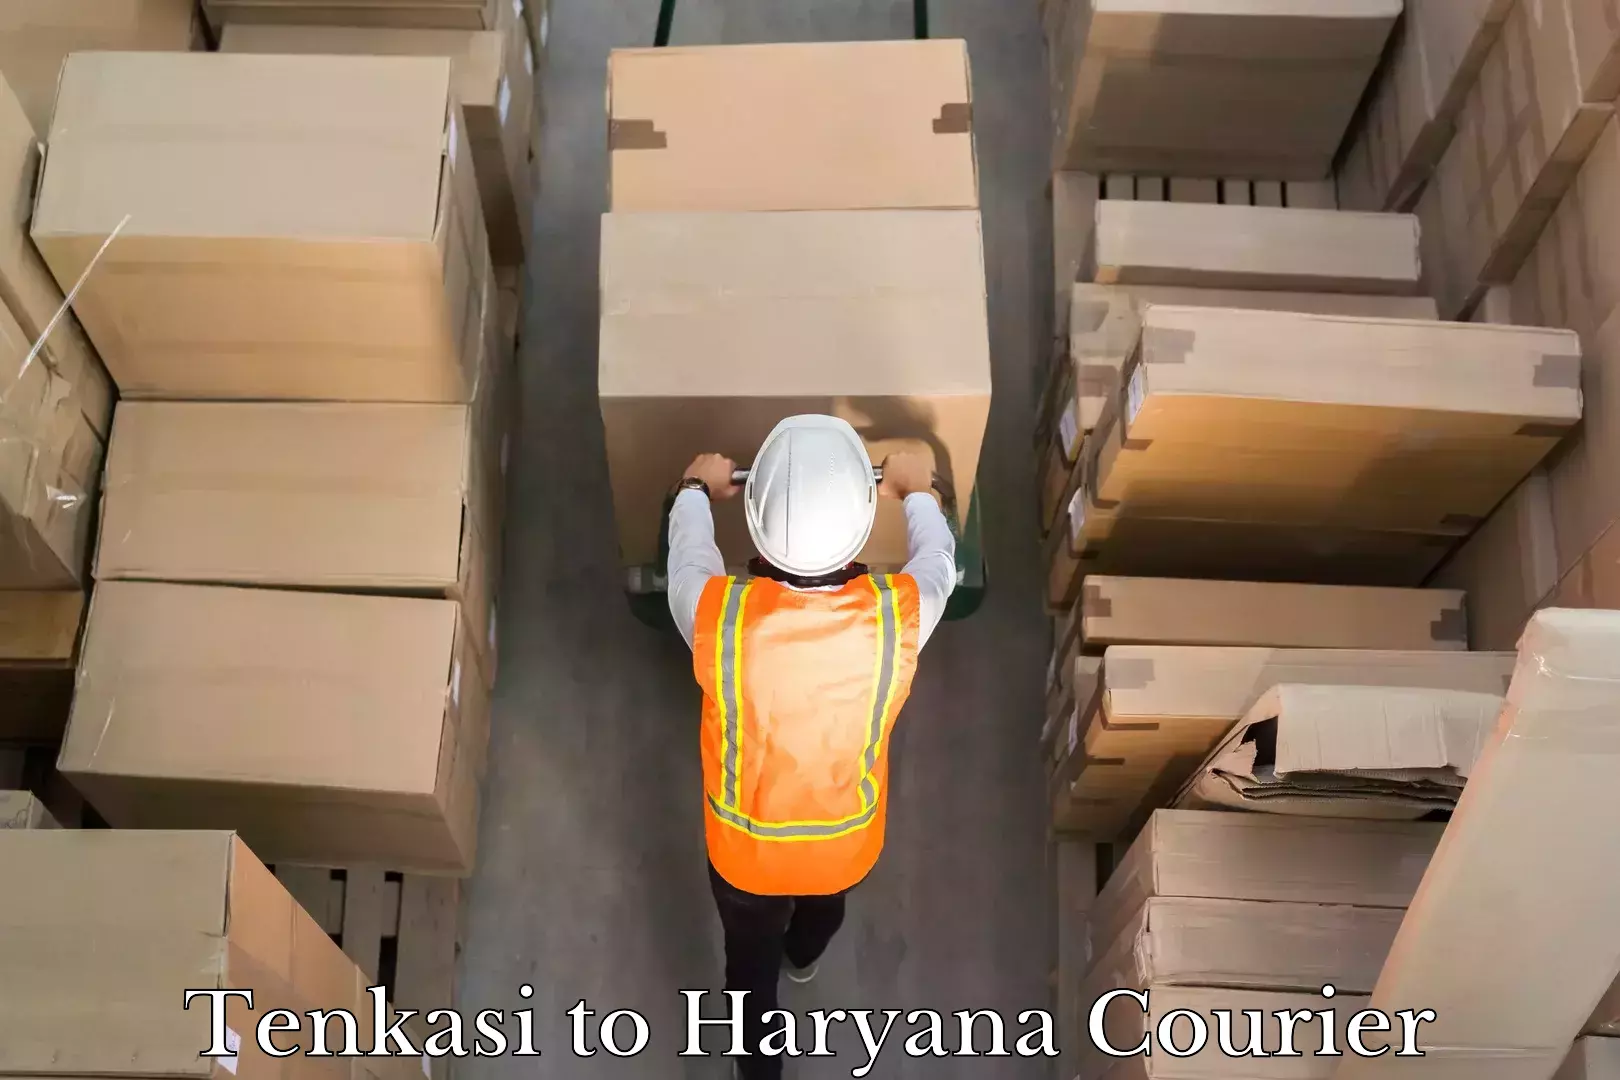 Customer-oriented courier services Tenkasi to Haryana